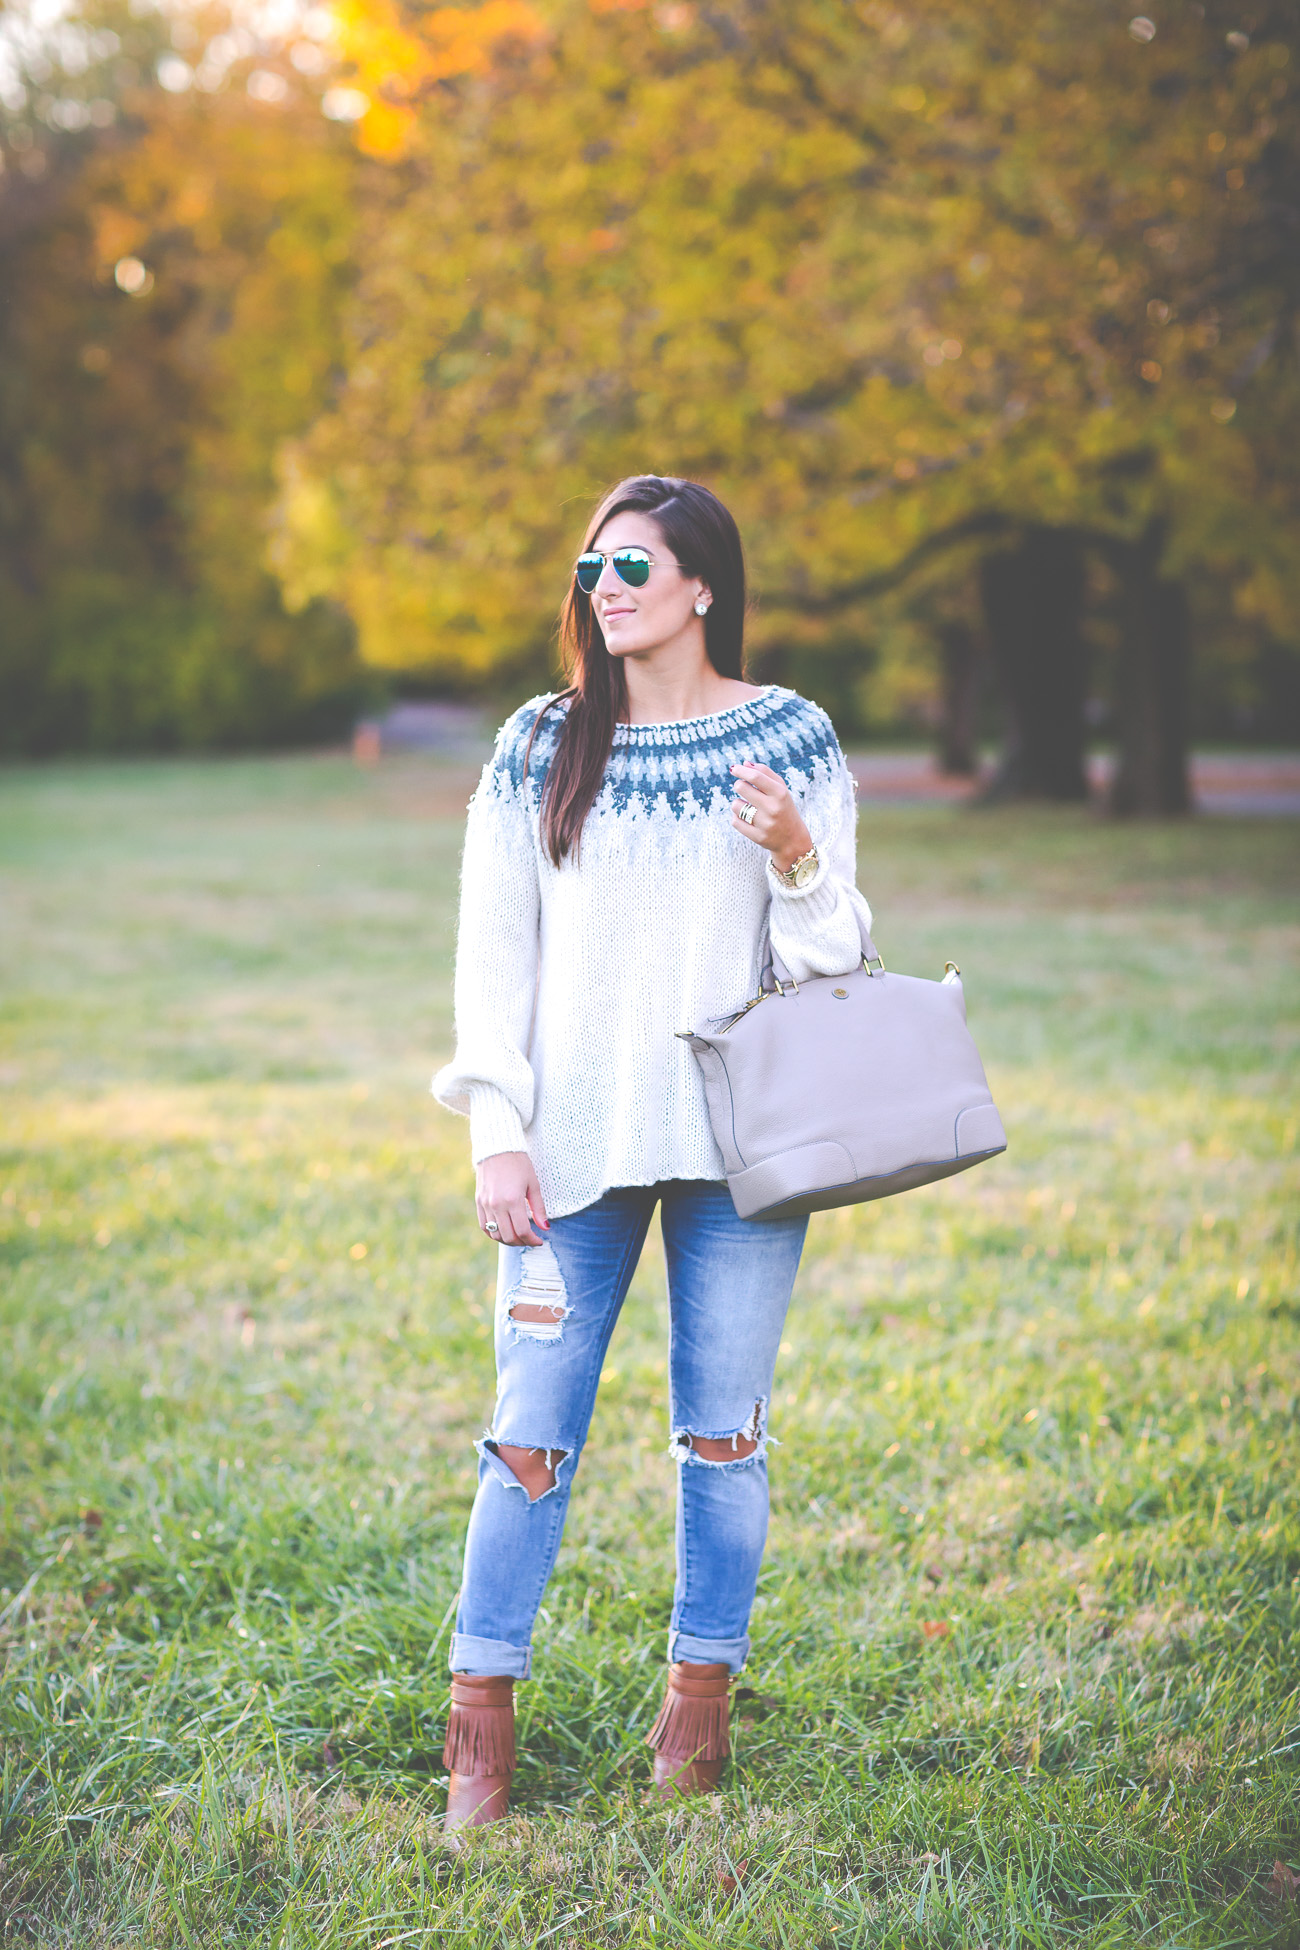 fair isle sweater, free people sweater, fall style, fall fashion, fall outfit ideas, distressed jeans, fringe booties, fringe boots, preppy fall style // grace wainwright from a southern drawl